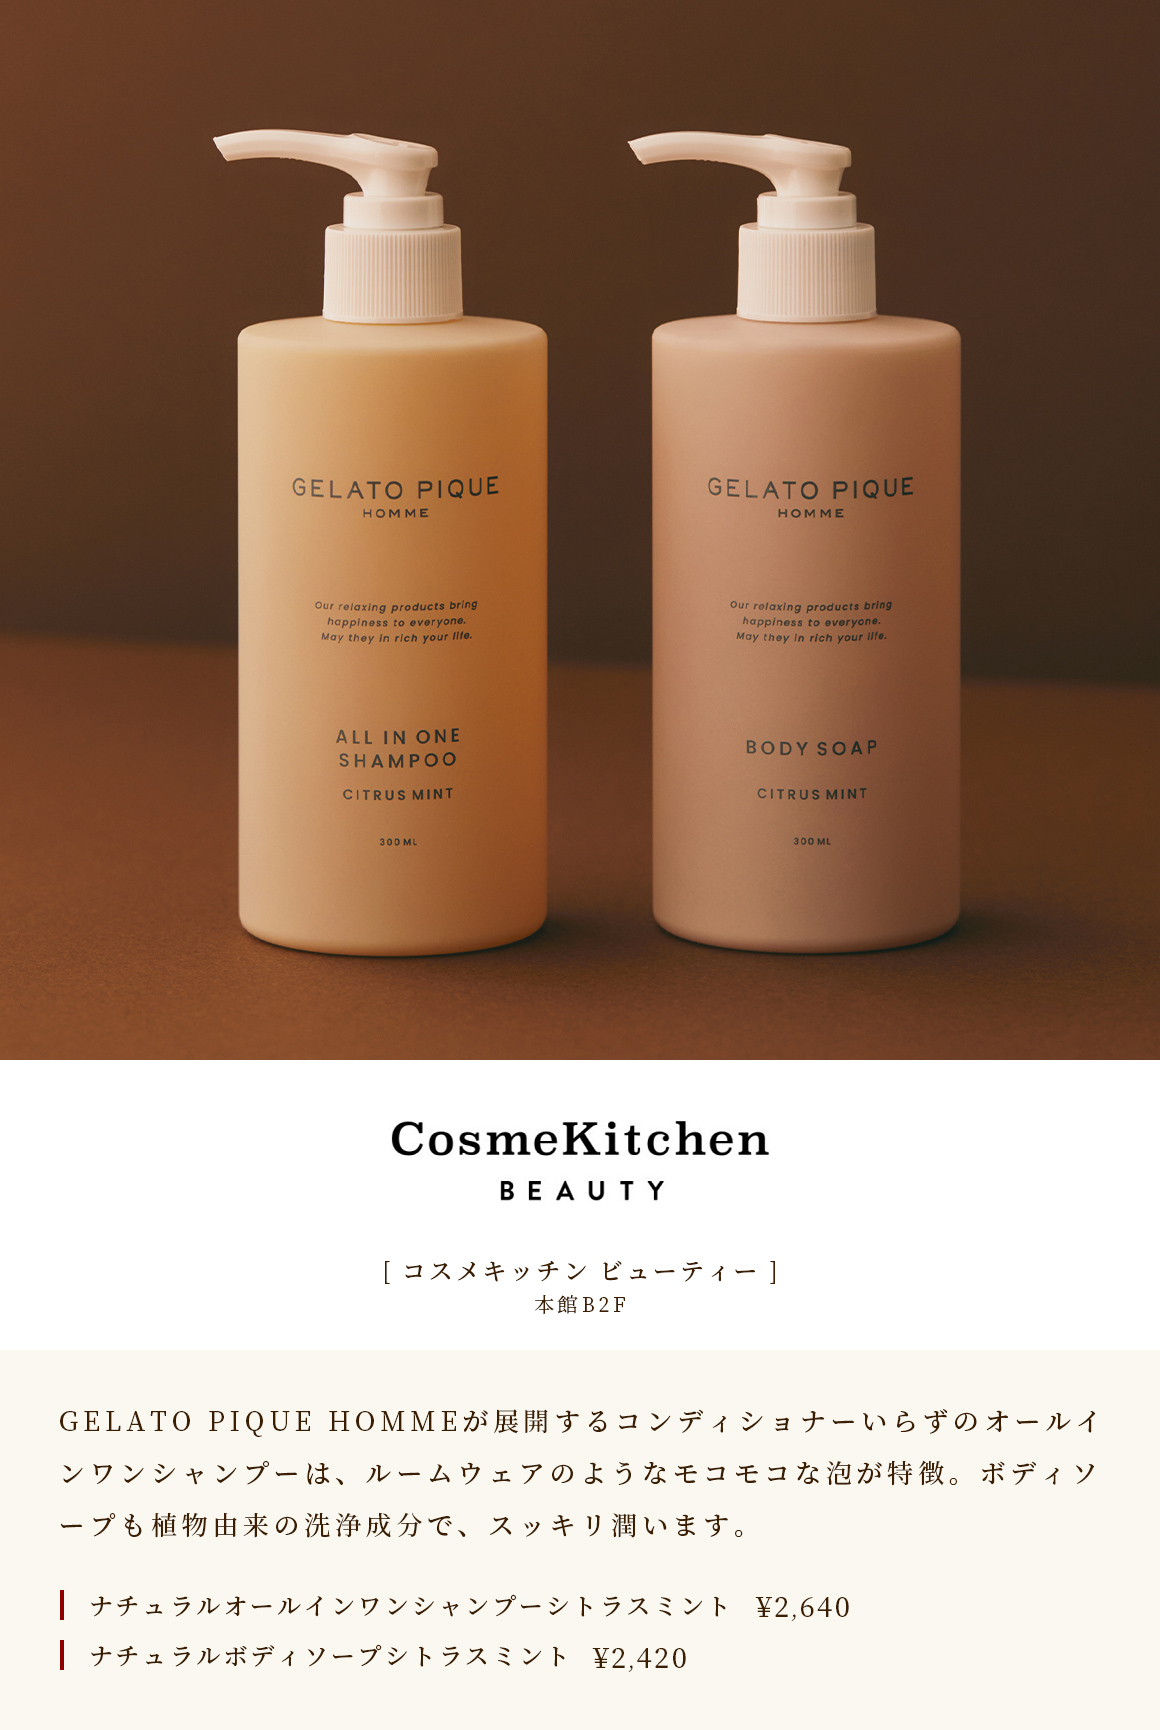 [Cosmetic Kitchen Beauty] The all-in-one shampoo developed by B2F GELATO PIQUE HOMME in the Main Building, which does not require a conditioner, is characterized by its moco-moco foam like room wear. Body soap is also a plant-derived cleansing ingredient that moisturizes cleanly. Natural All-in-One Shampoo Citrus Mint ￥ 2,640 Natural Body Soap Citrus Mint ￥ 2,420